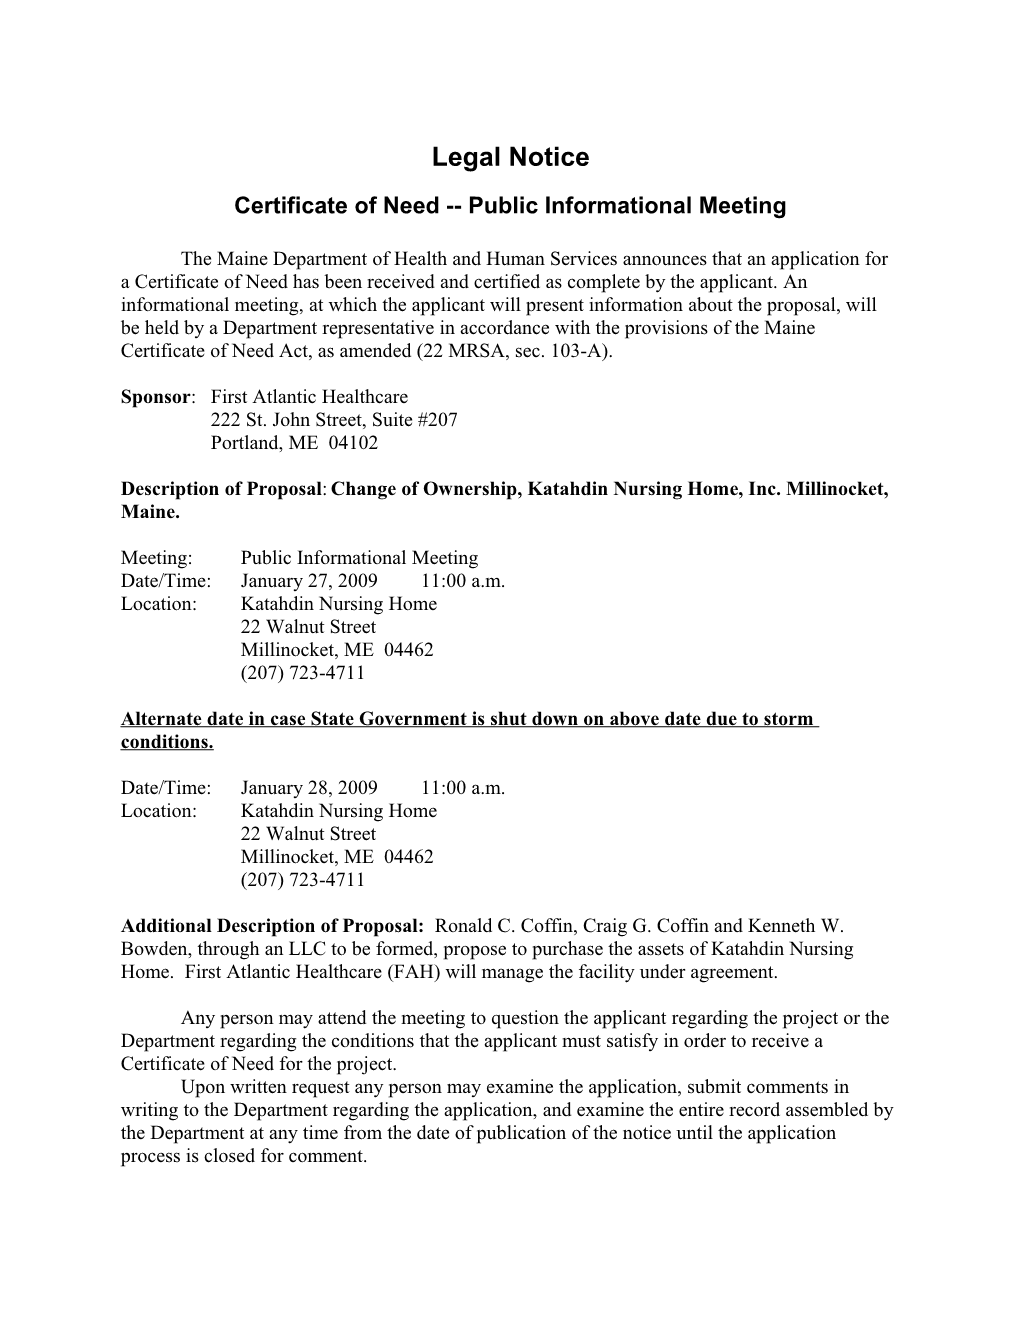 Certificate of Need Public Informational Meeting